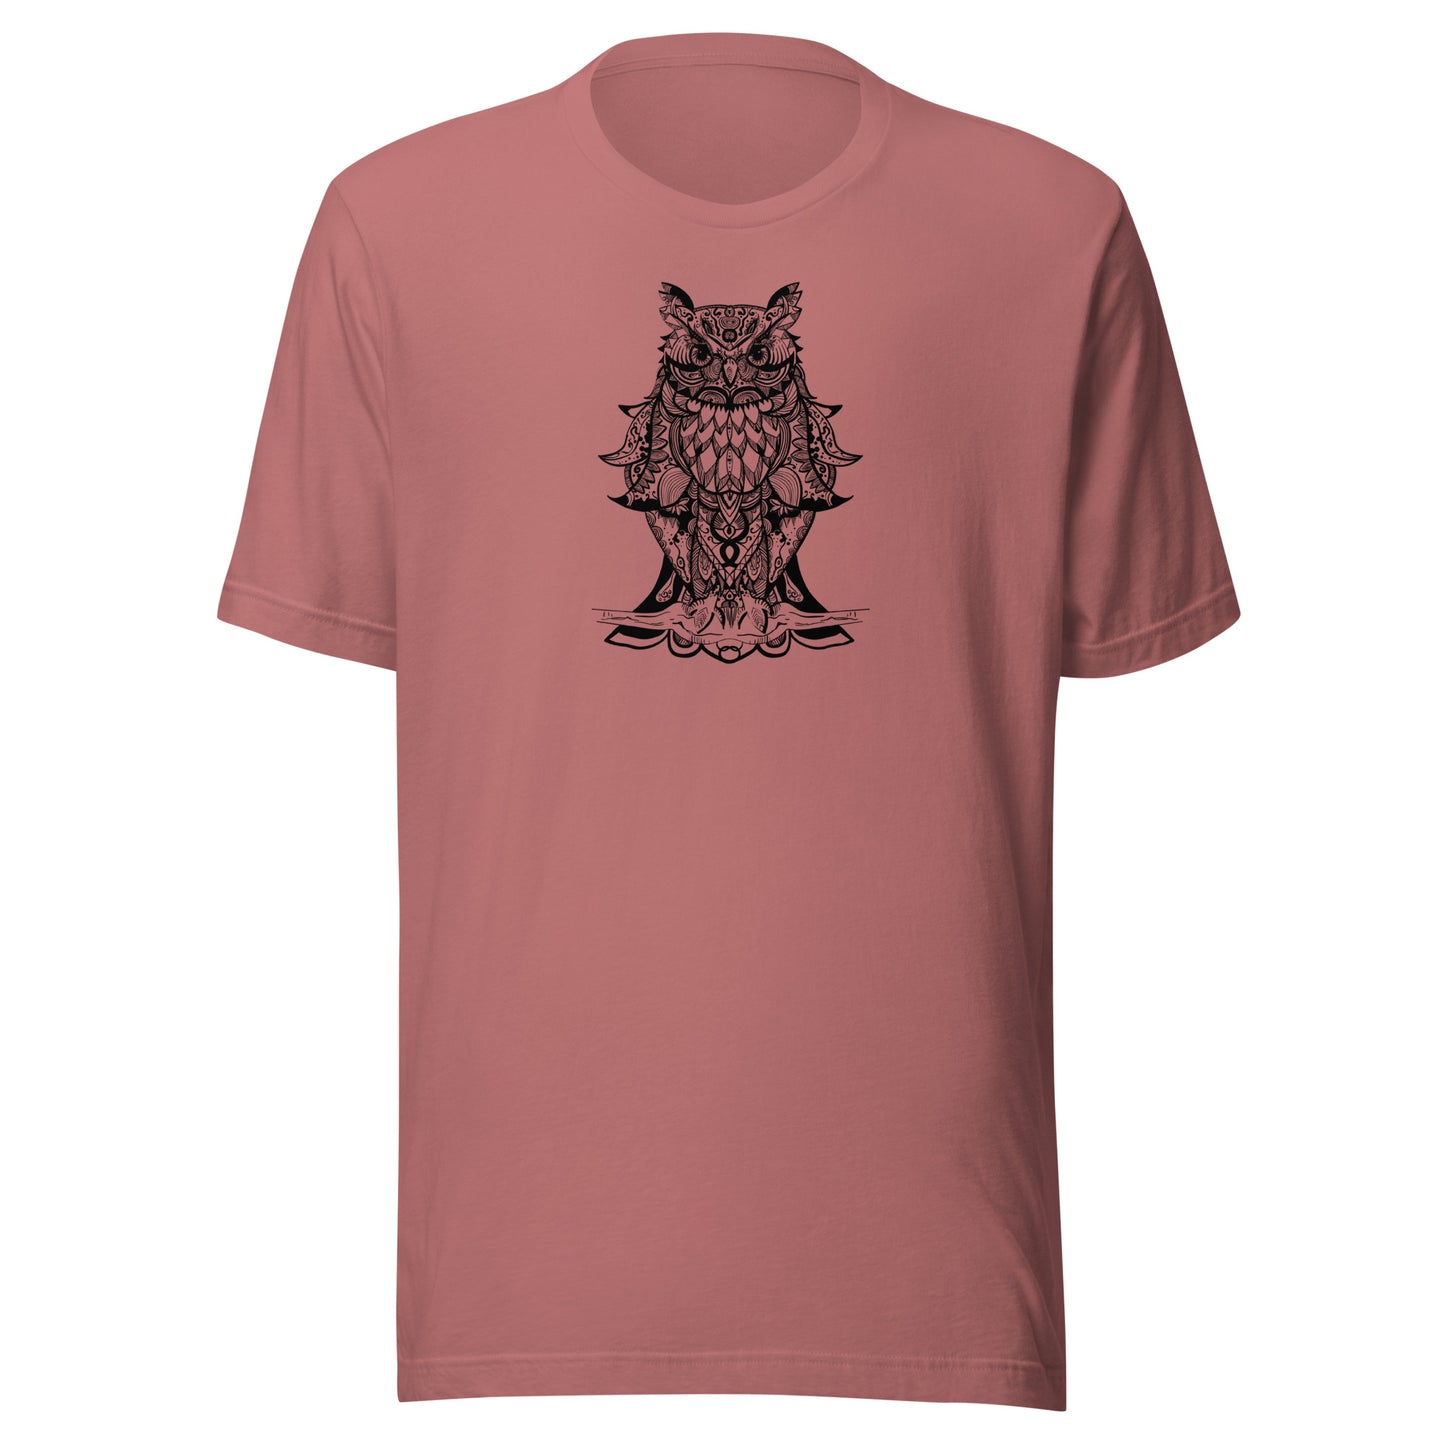 Unisex t-shirt with an owl